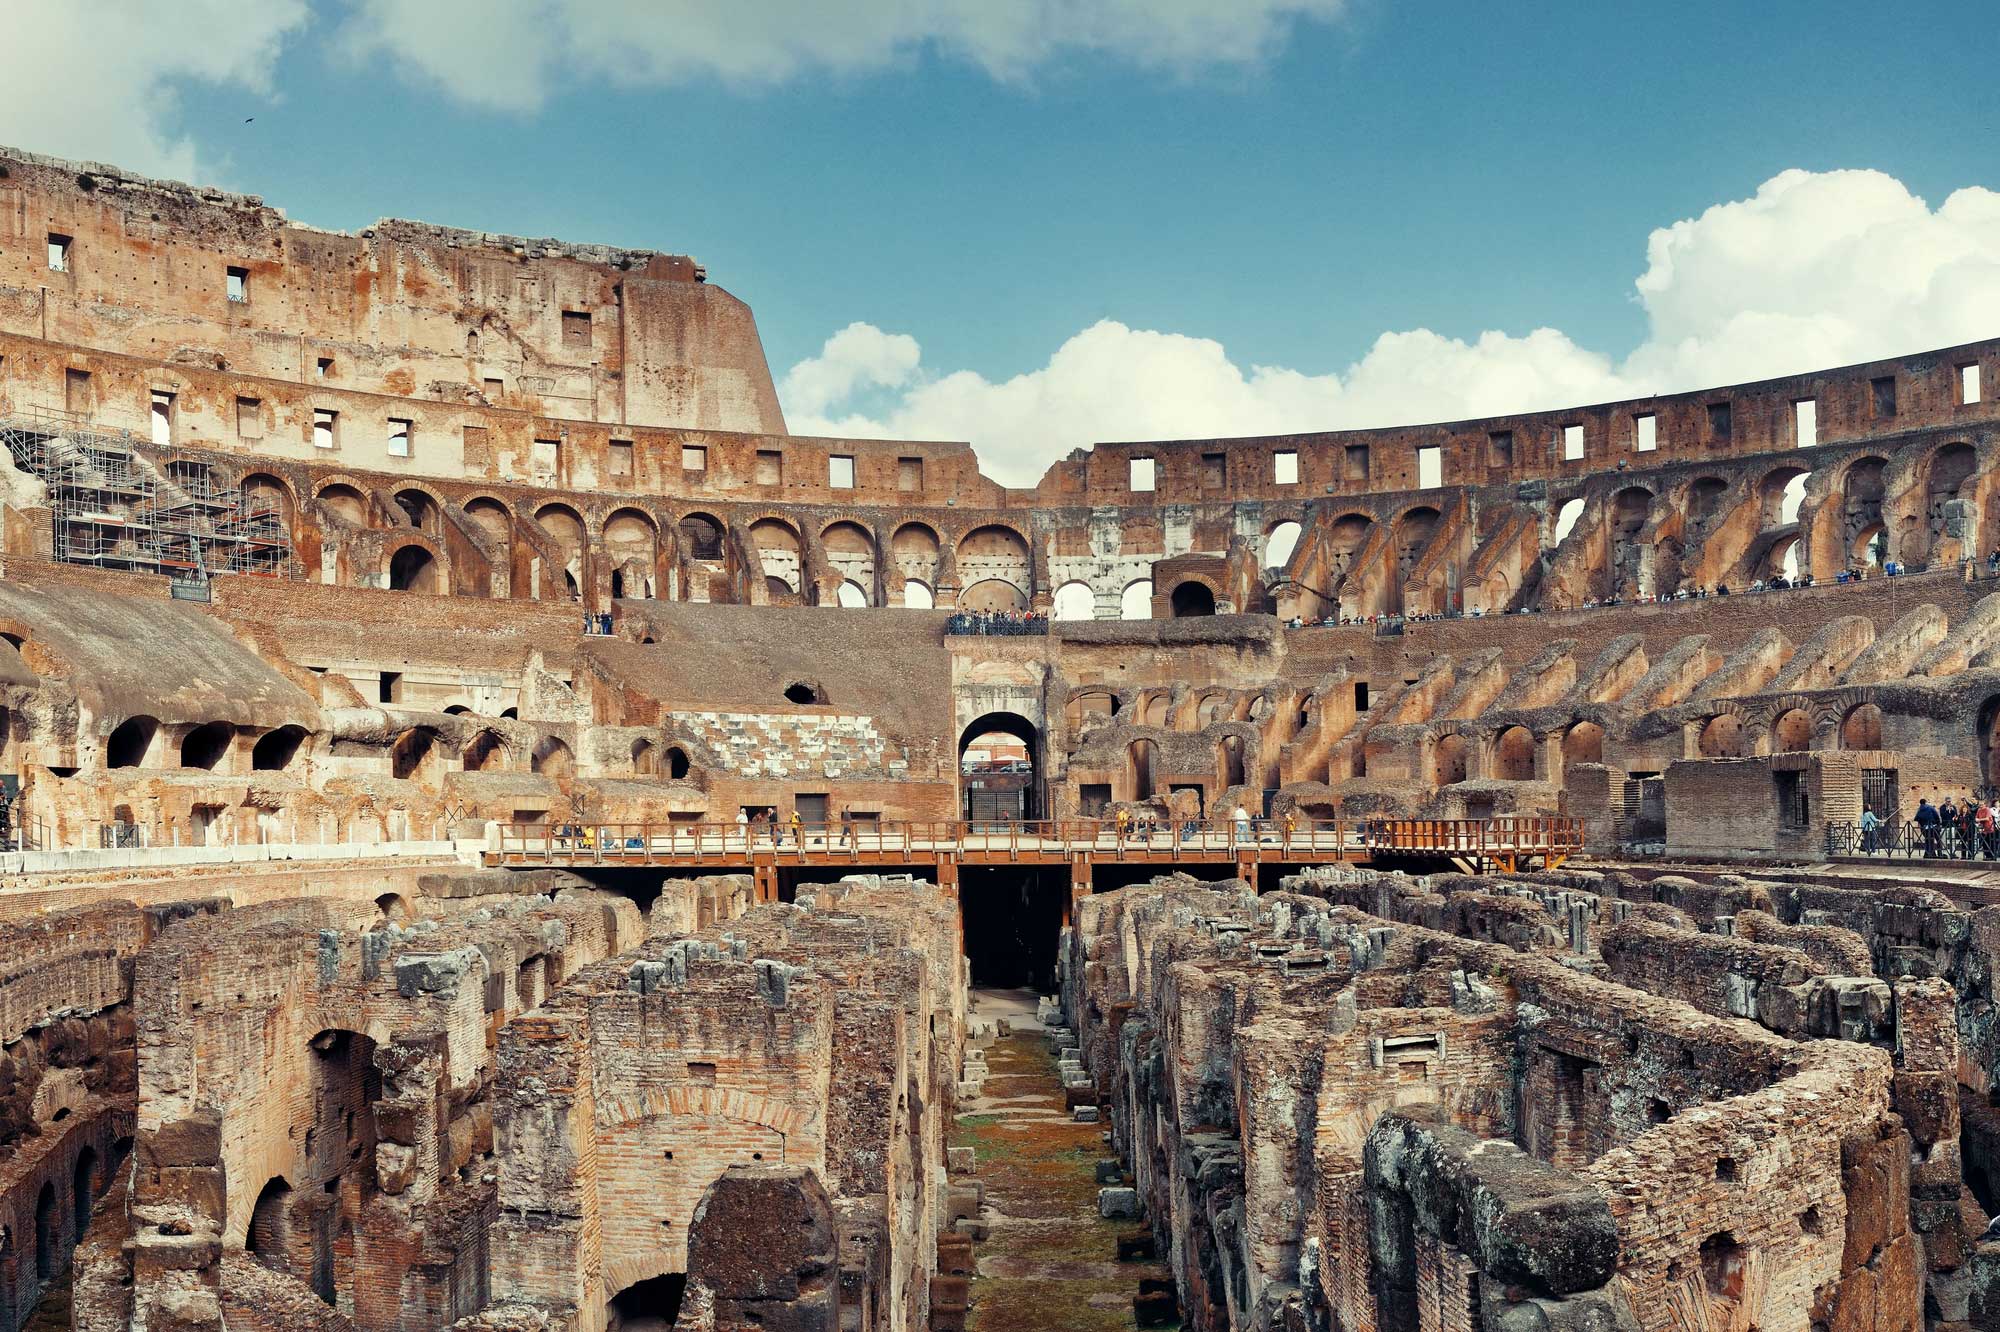 why is it called the colosseum